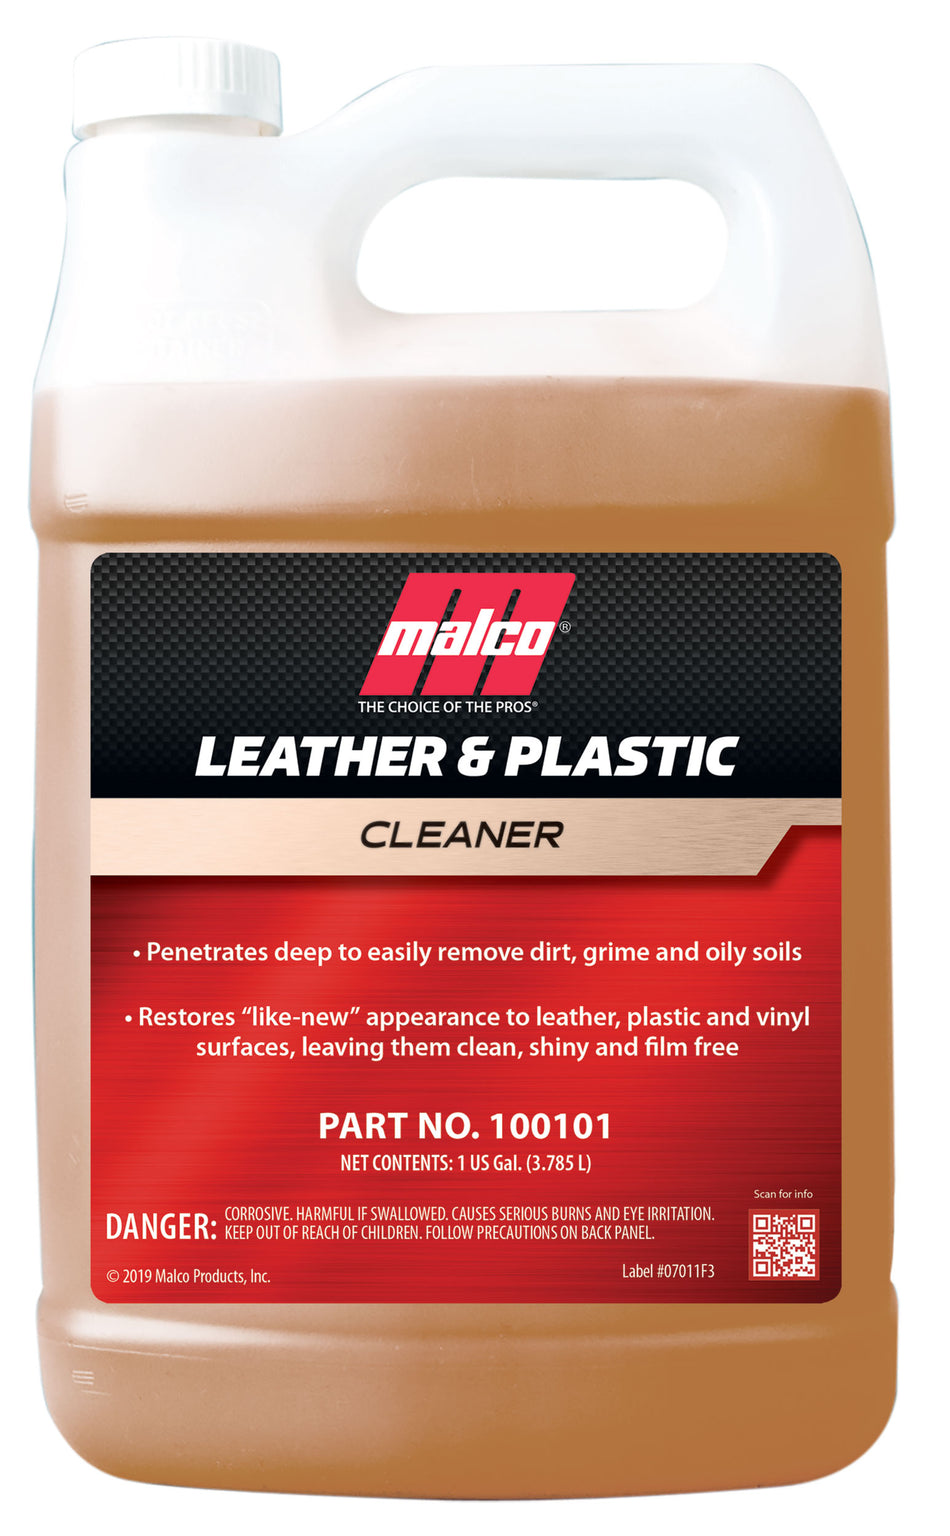 Malco Leather & Plastic Cleaner